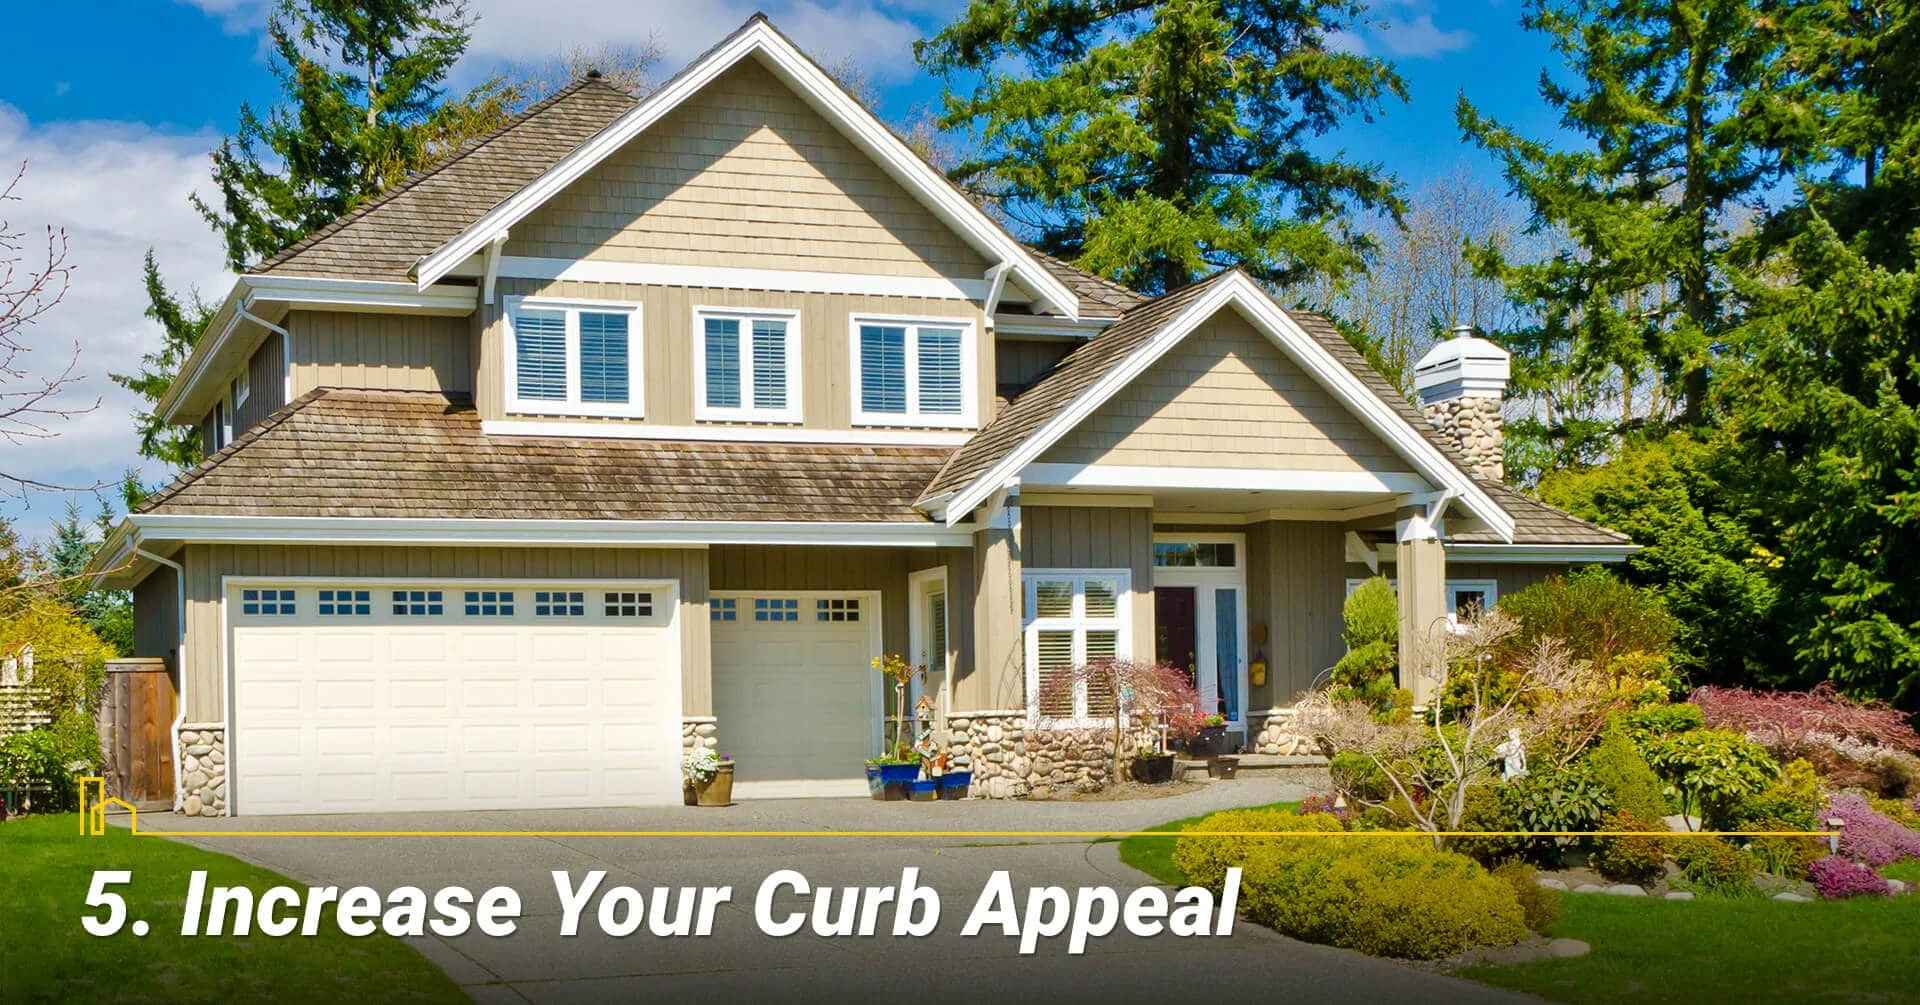 Increase Your Curb Appeal, maintain your curb appeal